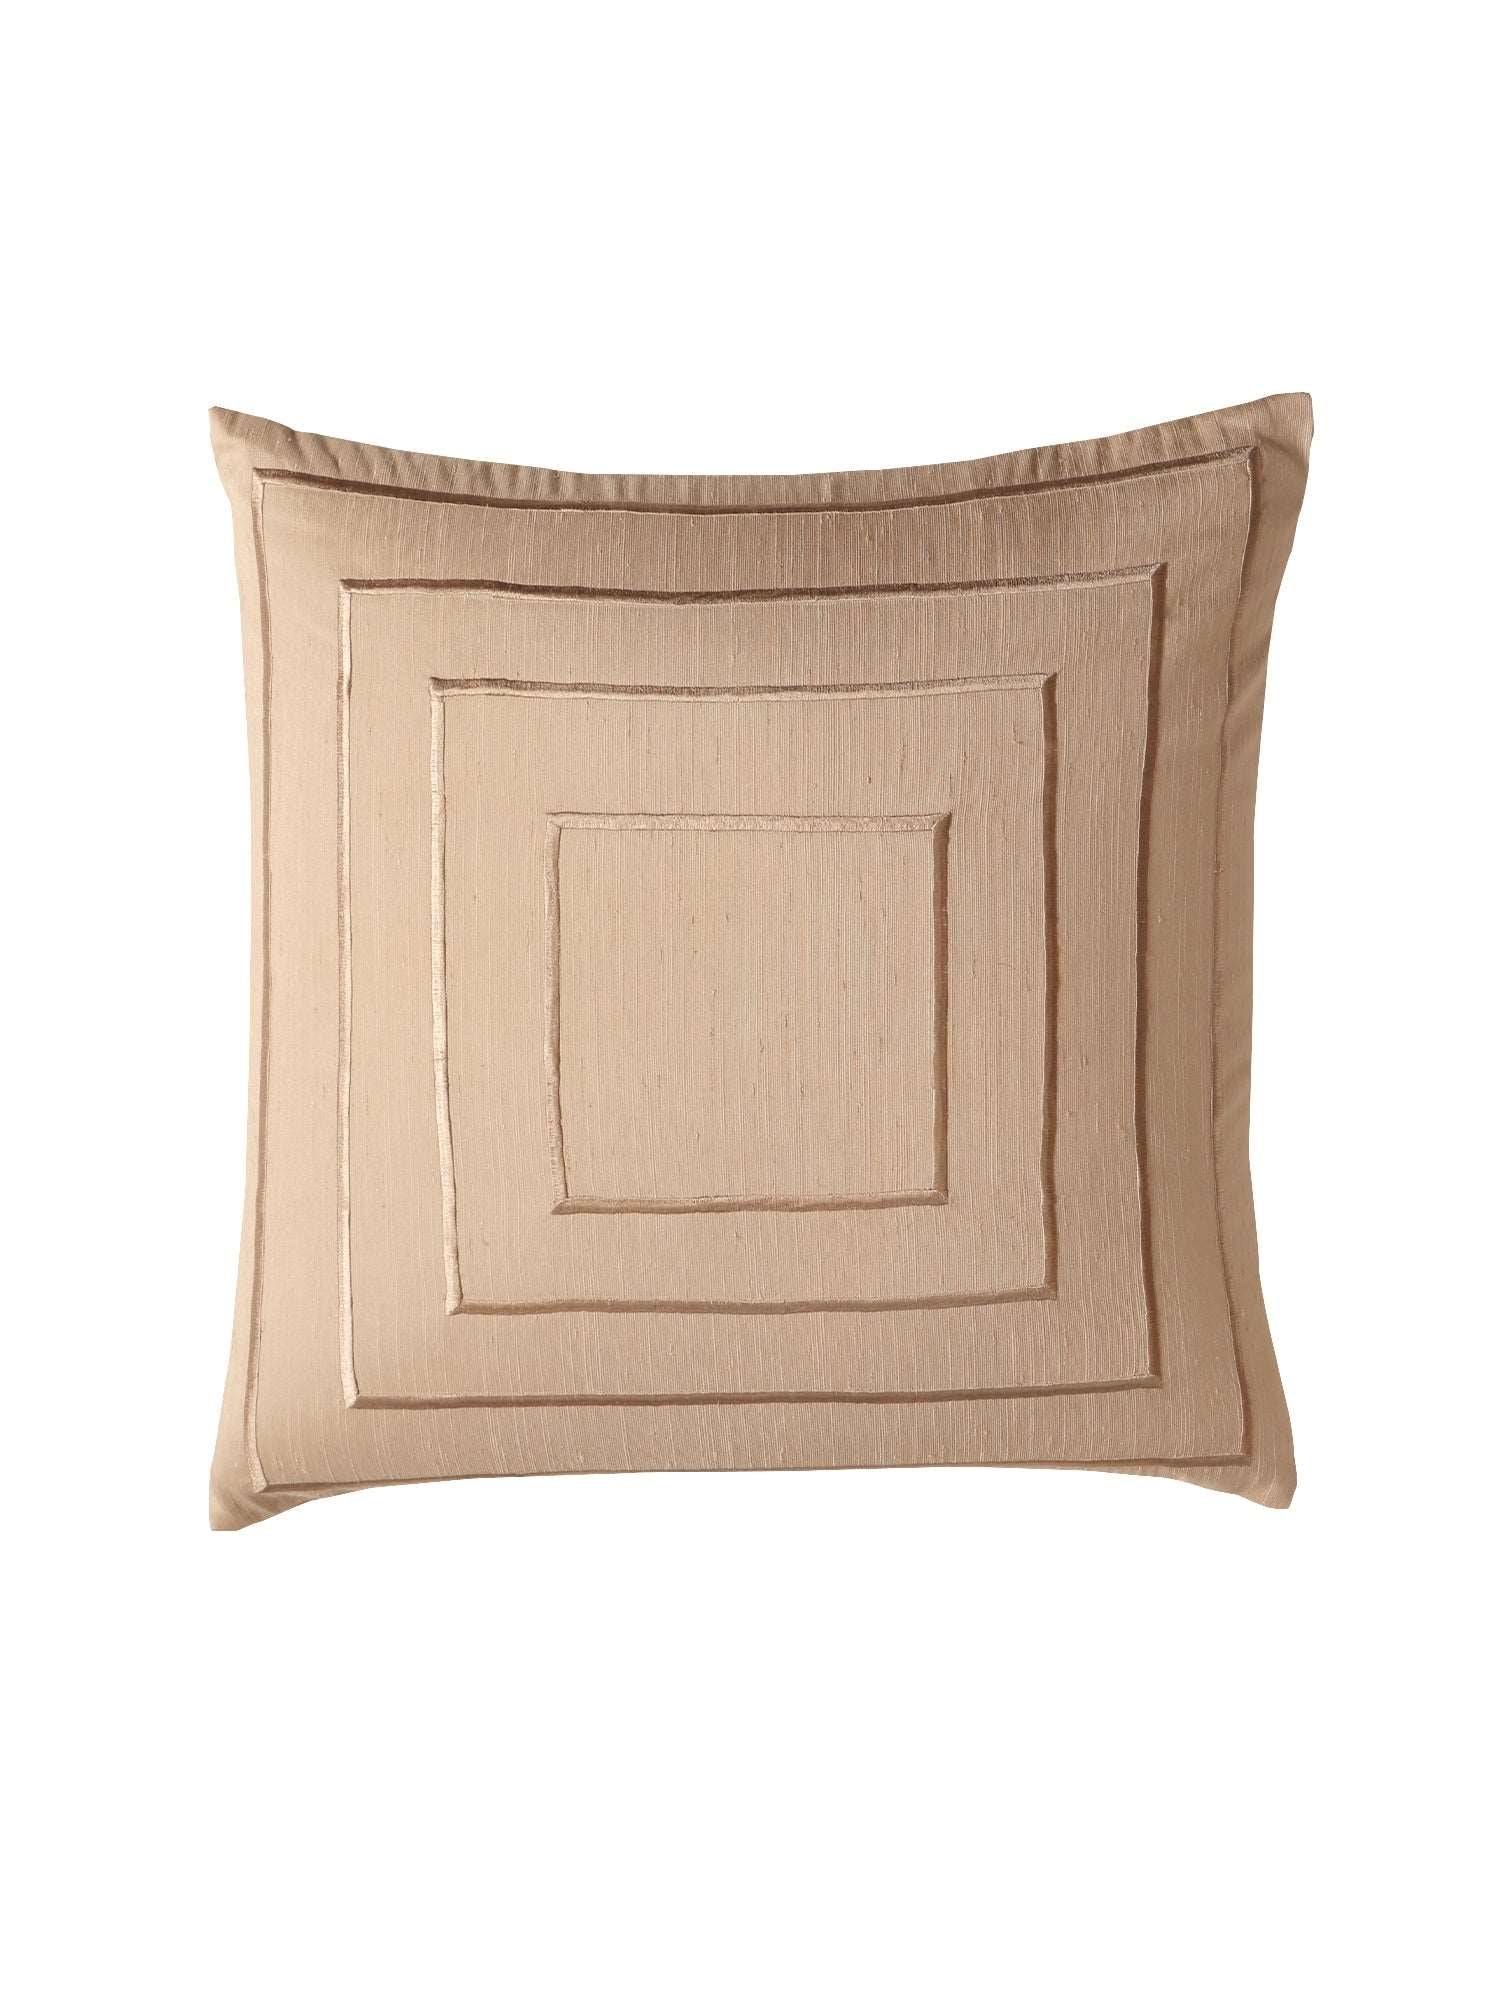 Cushion Cover Polyester Blend Concentric Embroidery Cream - 16" x 16"